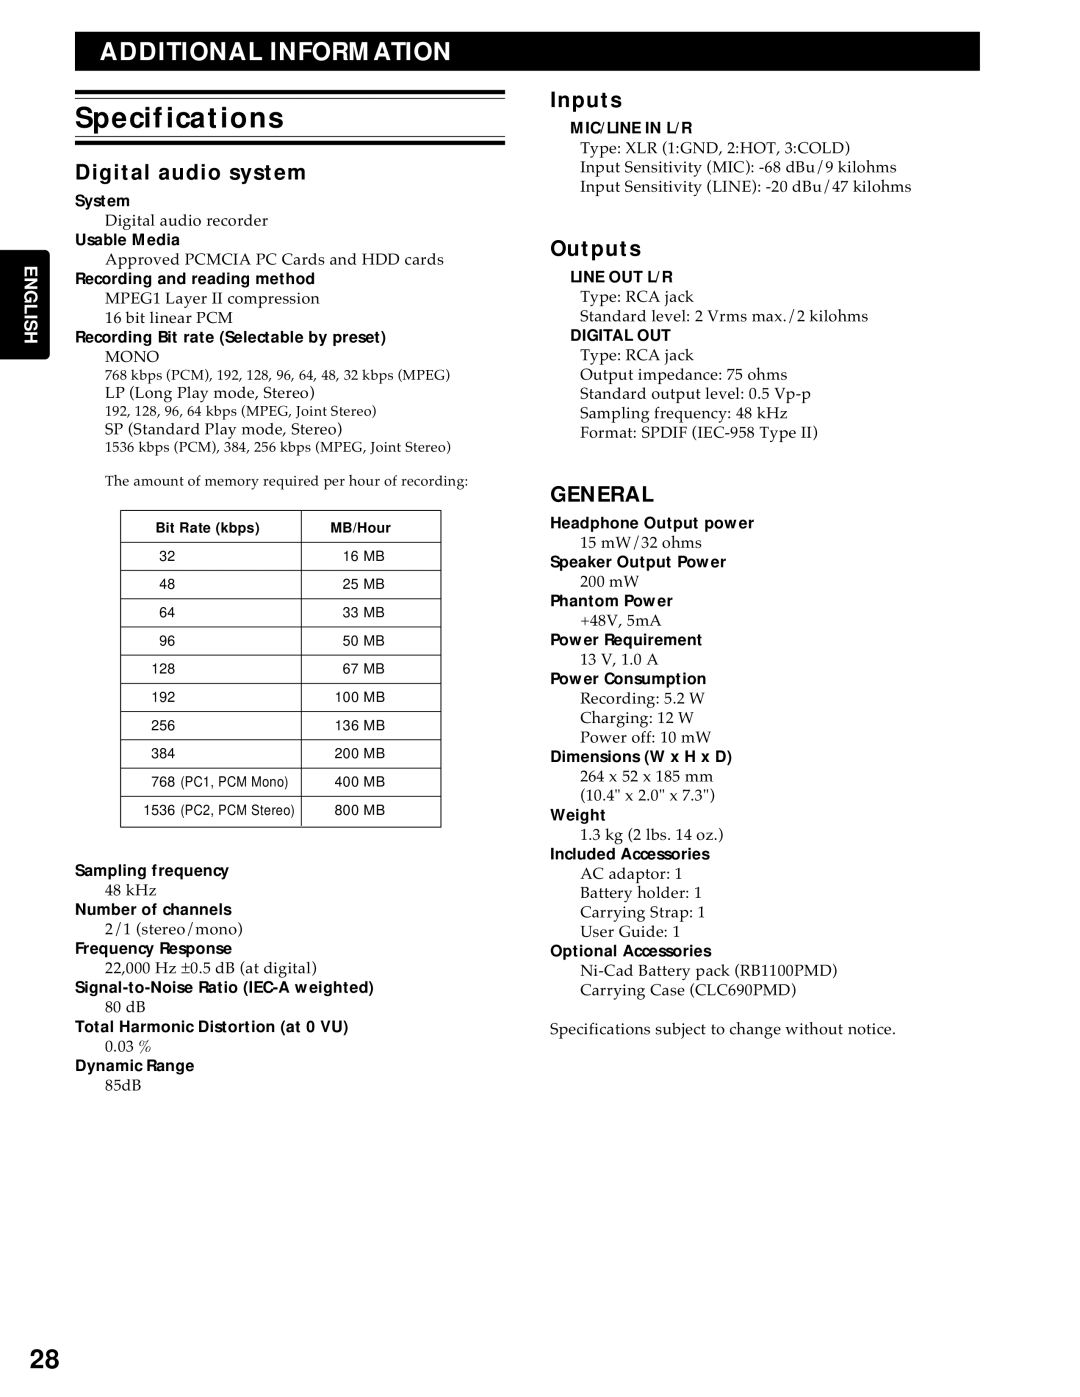 Marantz PMD690 manual Specifications, Inputs, Digital audio system, Outputs 